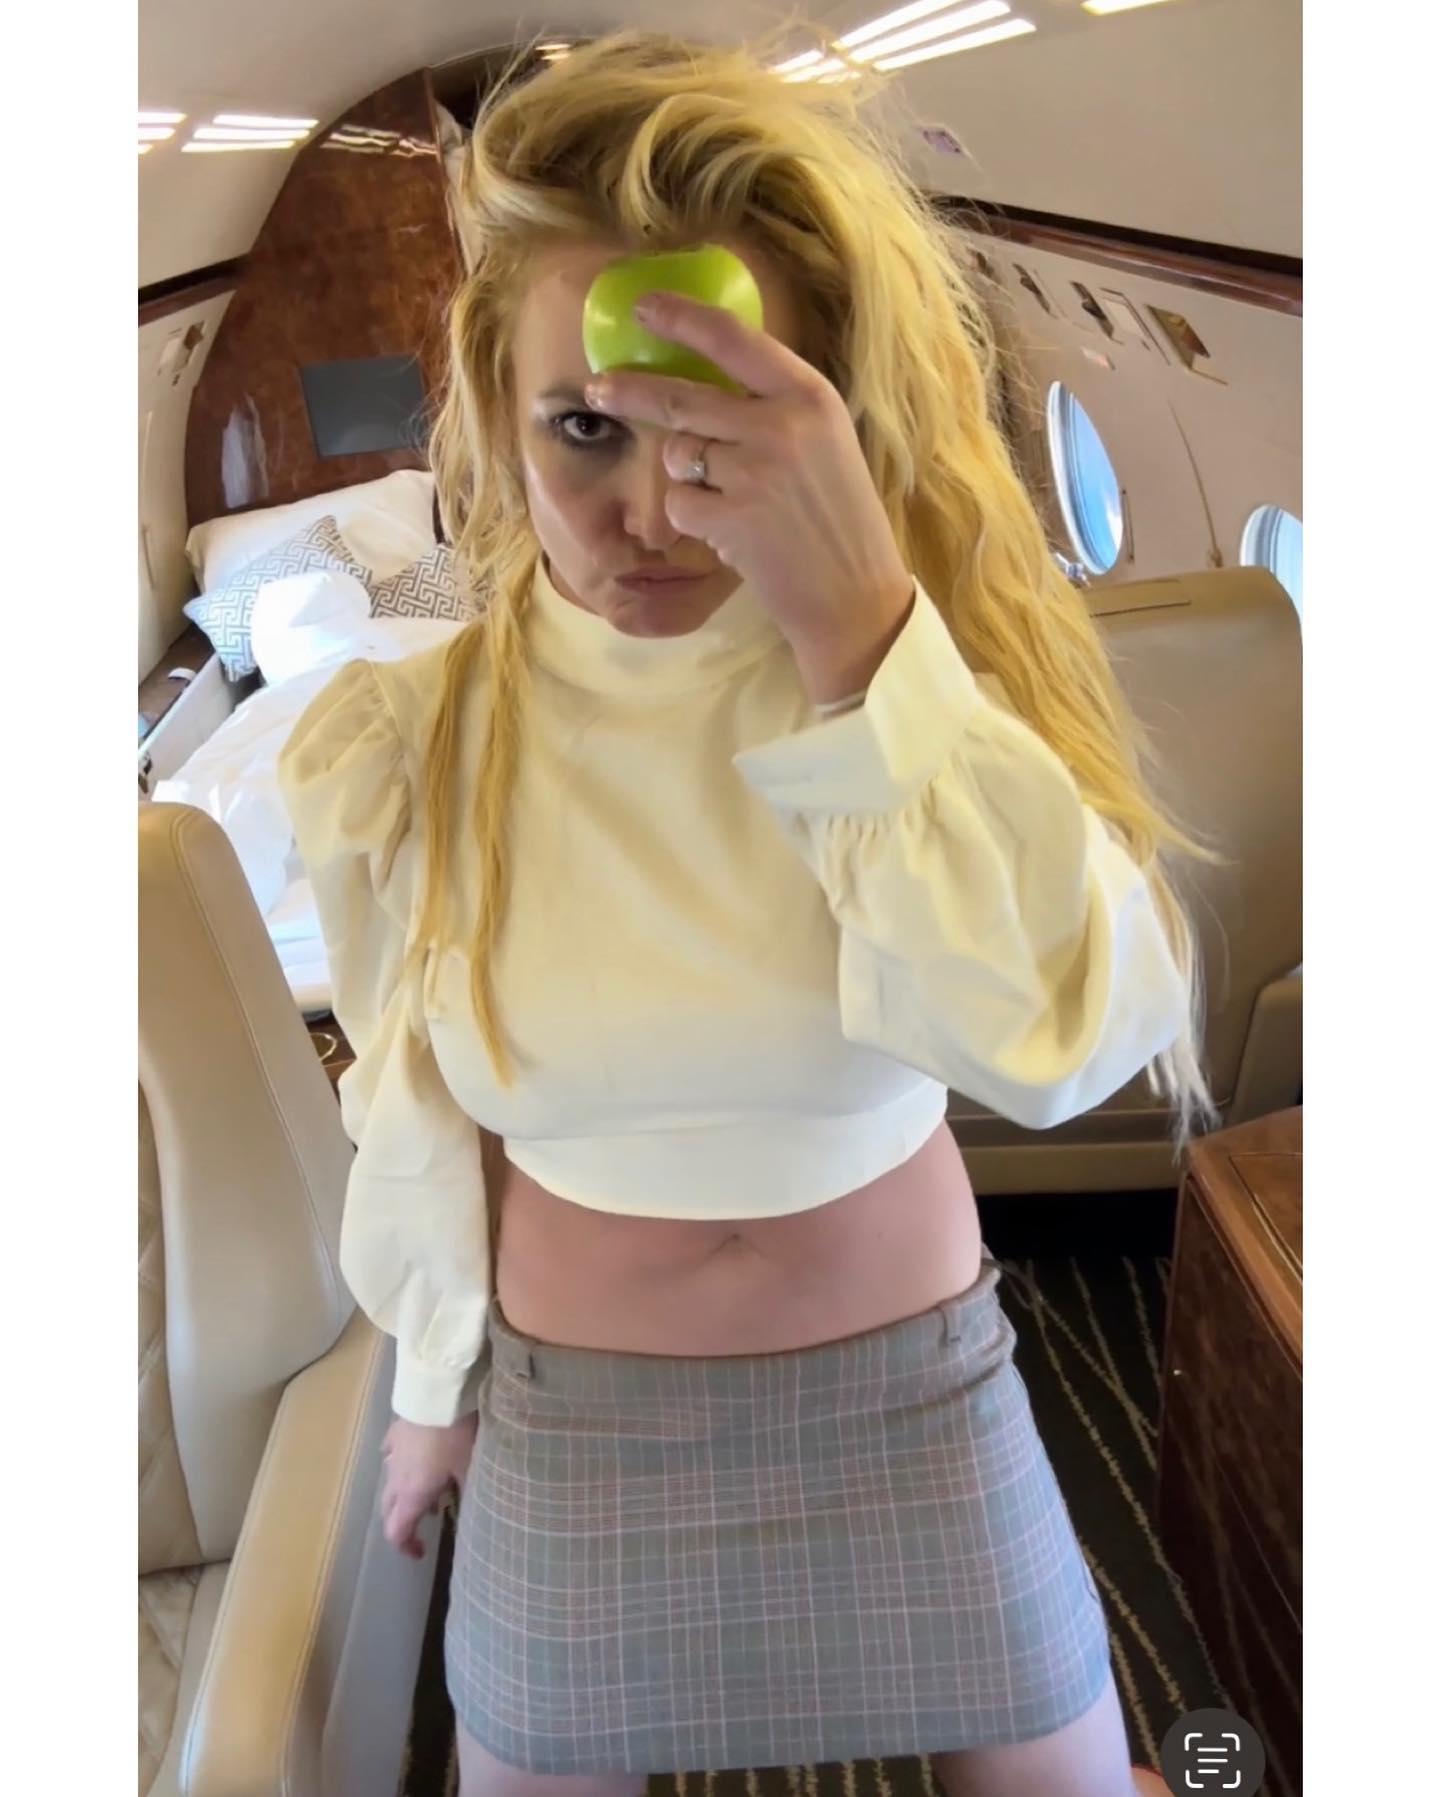 Britney Spears shows herself holding an apple on a plane